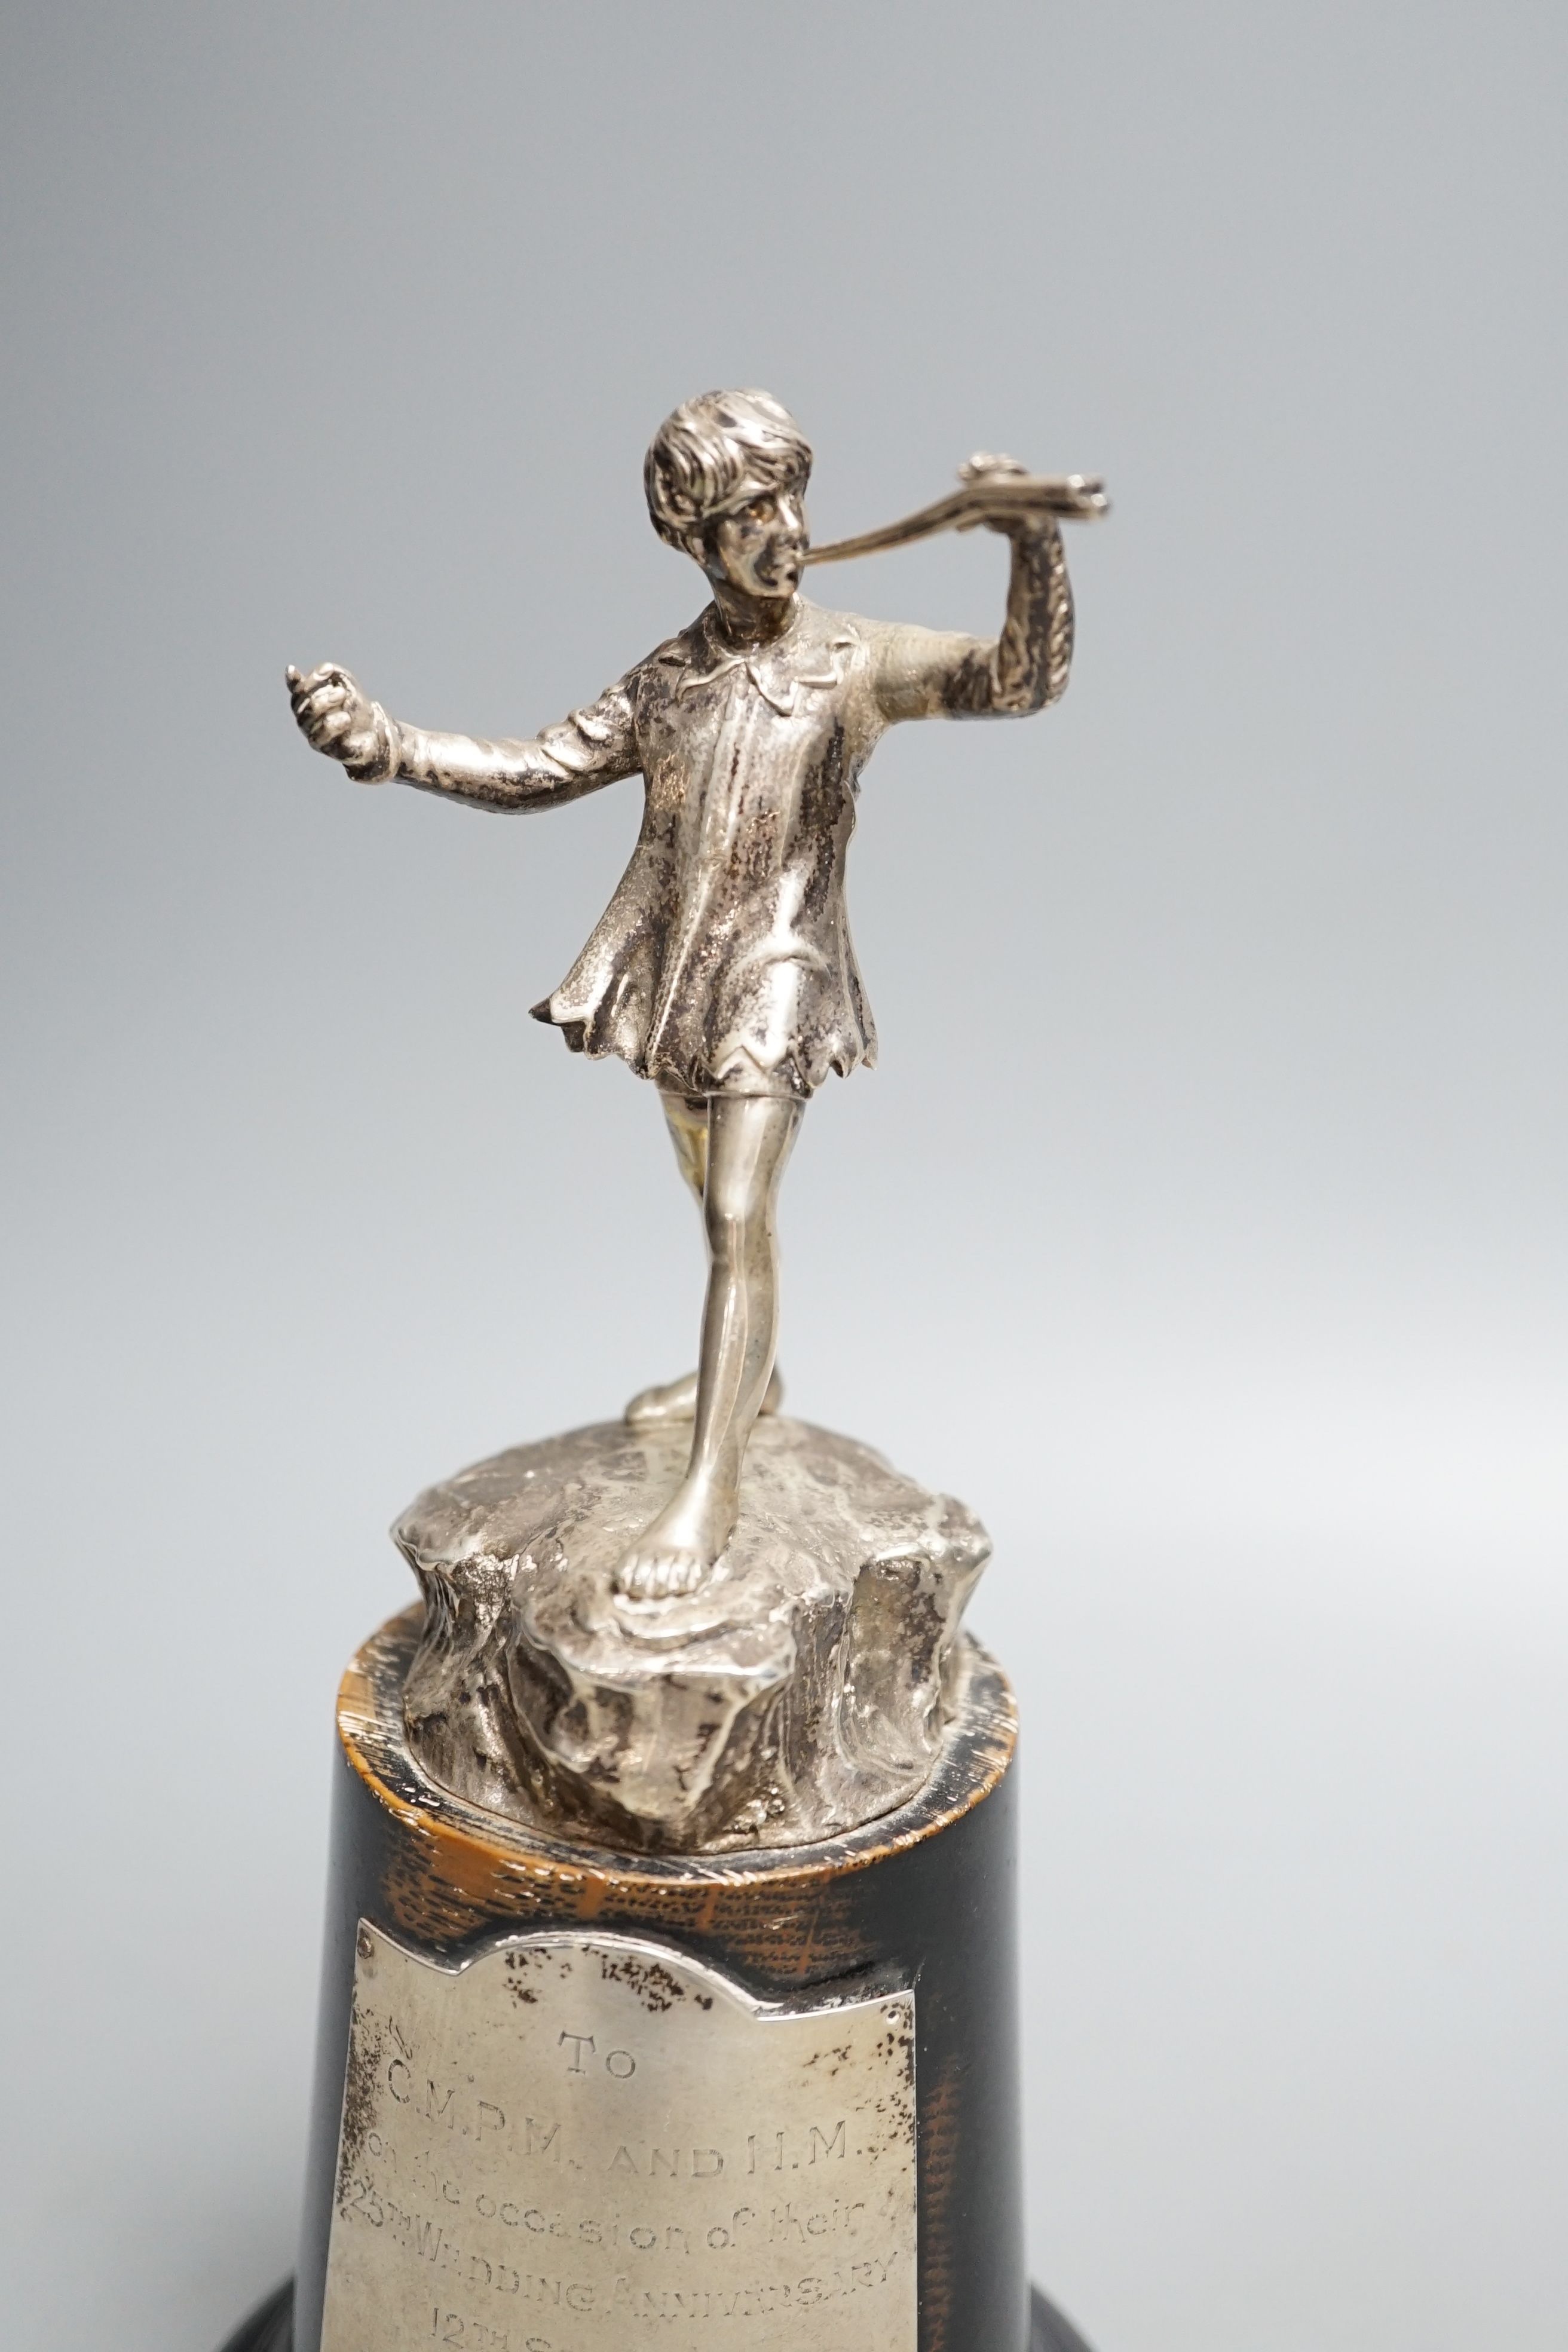 A late 1940's silver presentation figure of a young boy playing the pipes, on a rocky base, Goldsmiths & Silversmiths Co Ltd, London, 1949, on a wooden plinth with engraved presentation plaque, overall height 23.5cm